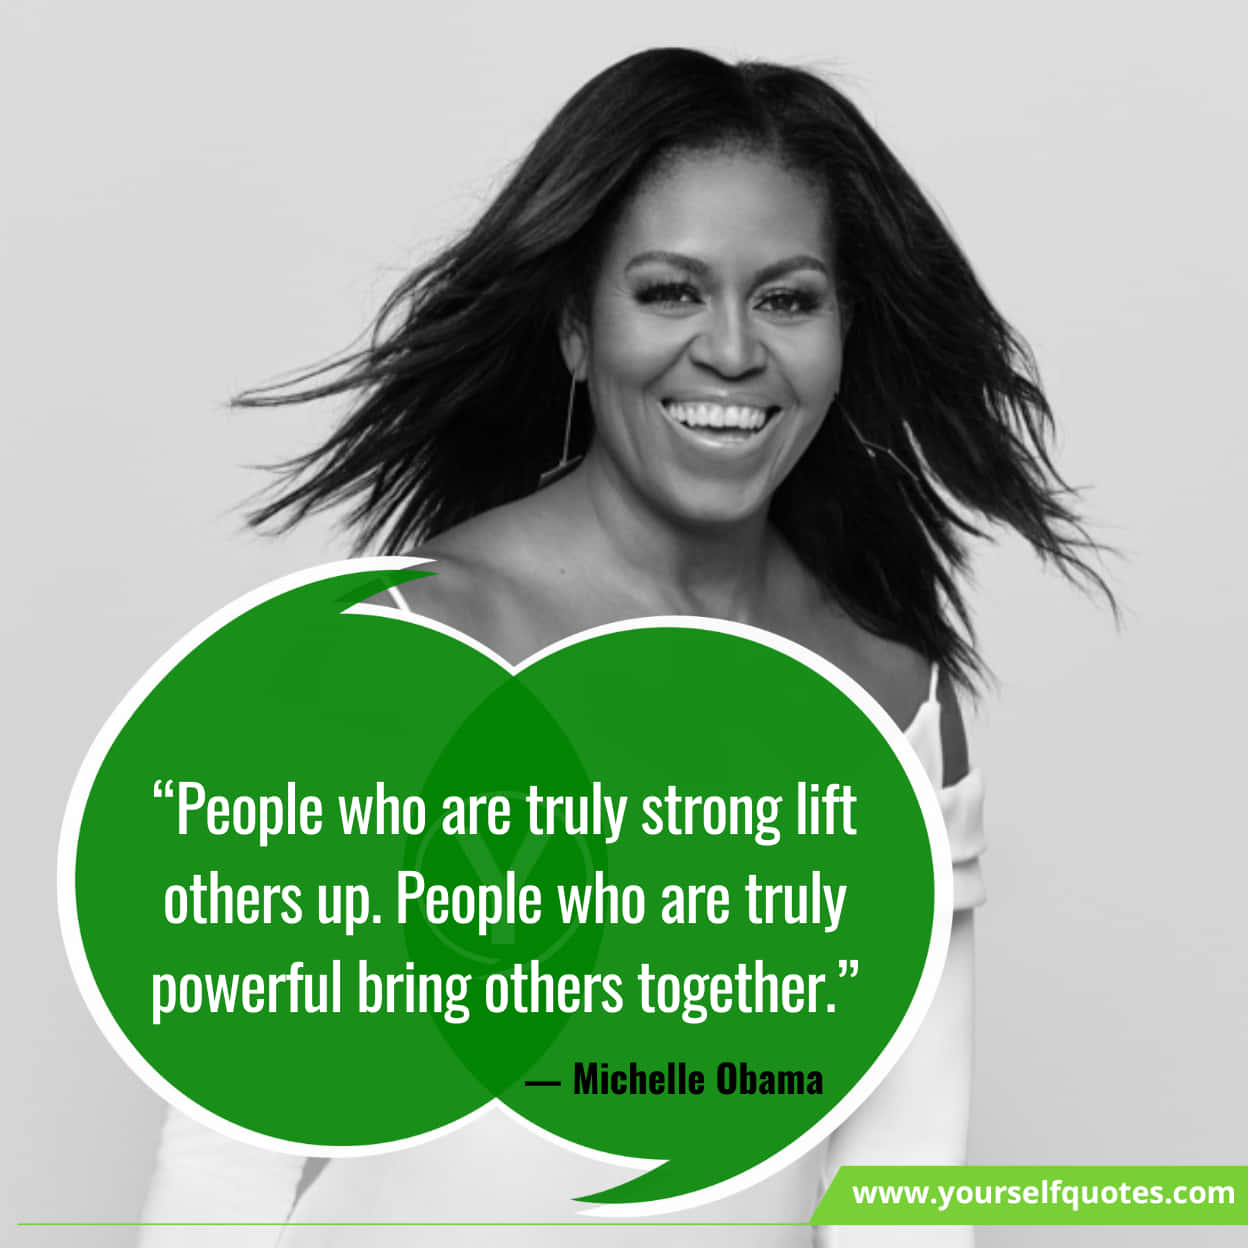 Michelle Obama Quotes About Leadership